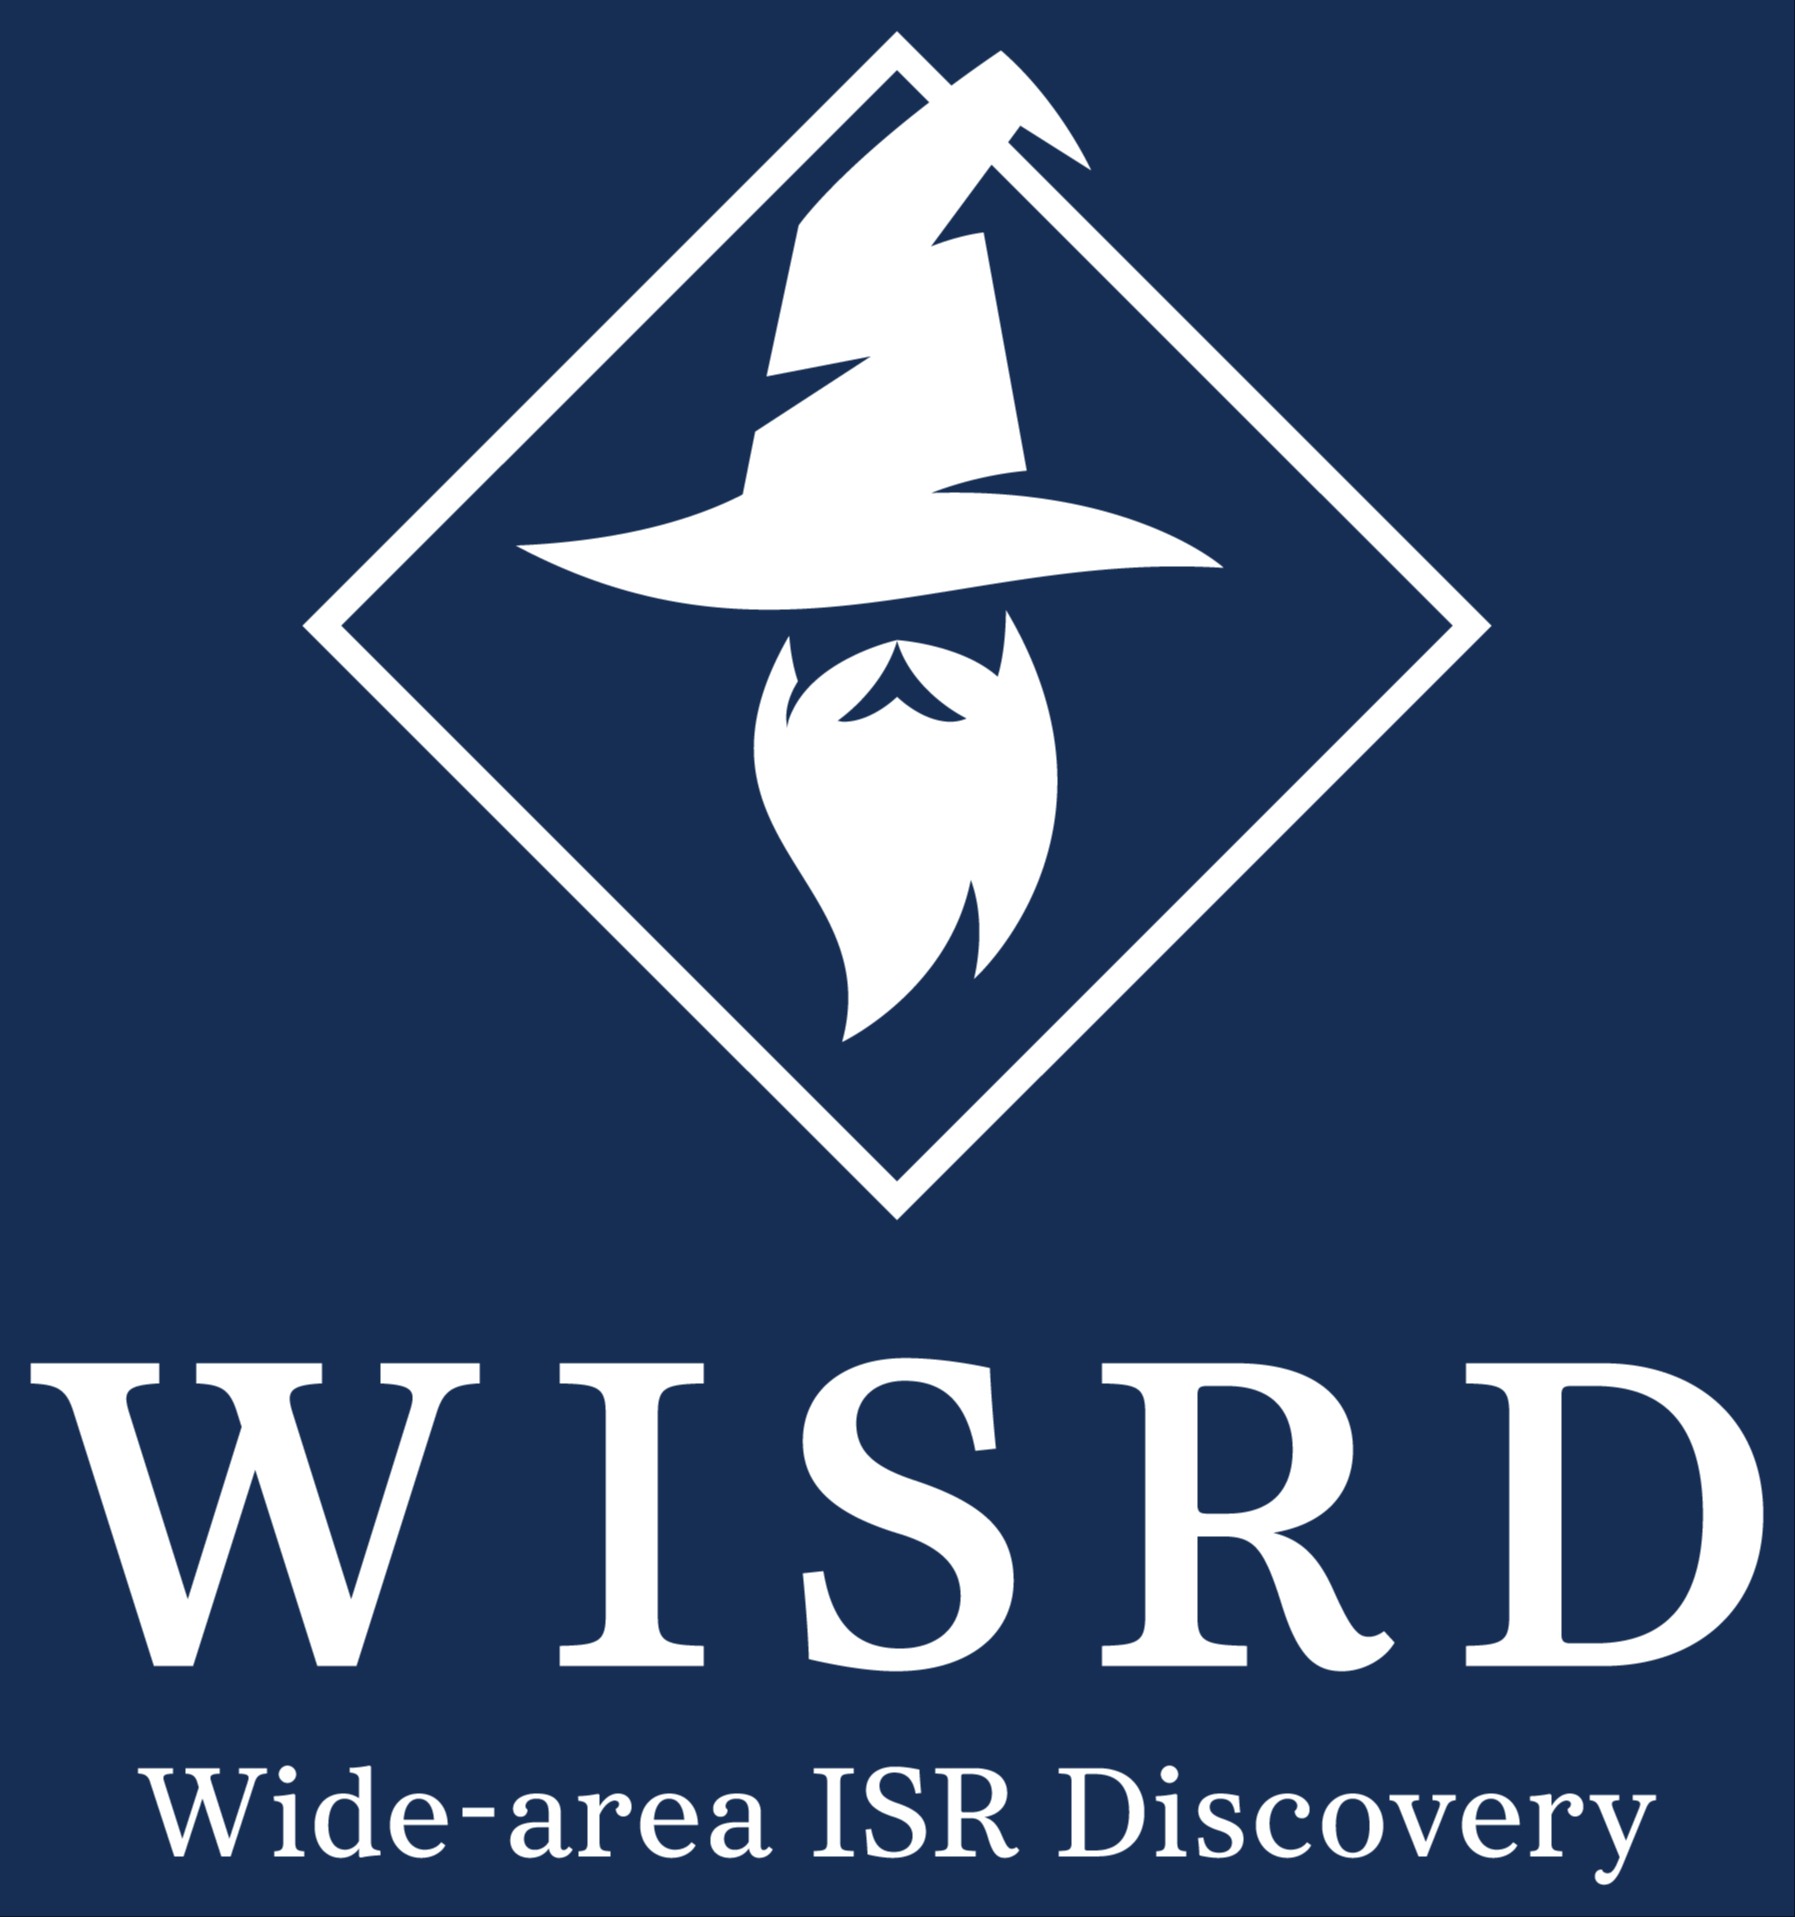 Wide-area ISR Discovery (WISRD) 18